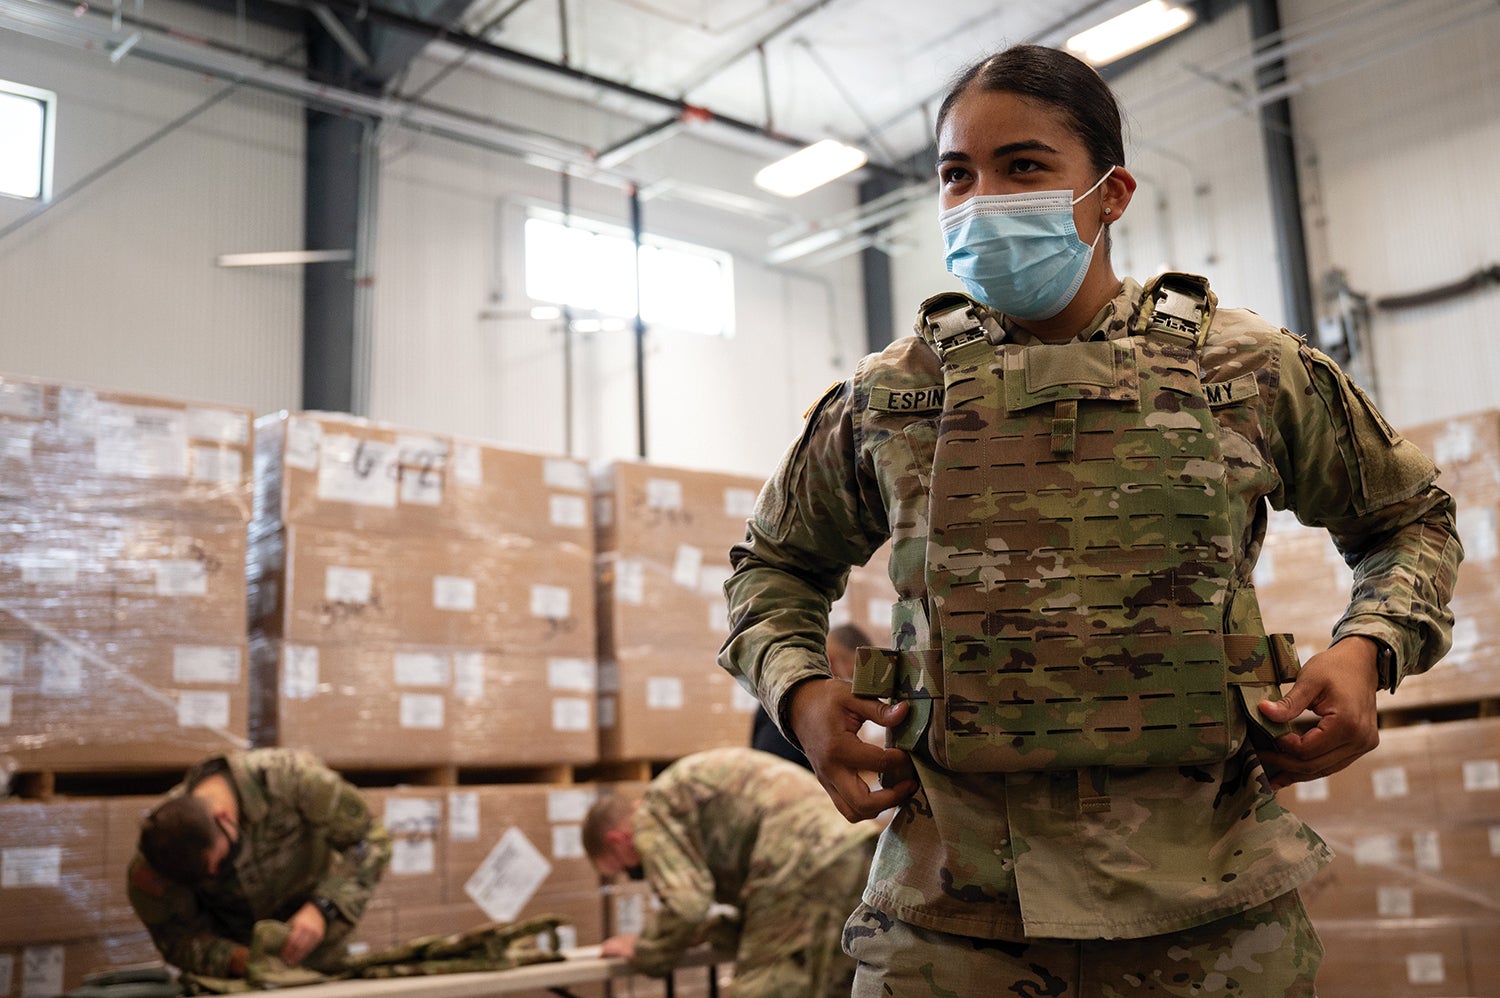 Pfc. Kimberly Espinoza with the 82nd Airborne Division adjusts her second-generation Modular Scalable Vest at Fort Bragg, North Carolina. (Credit: U.S. Army/Jason Amadi)